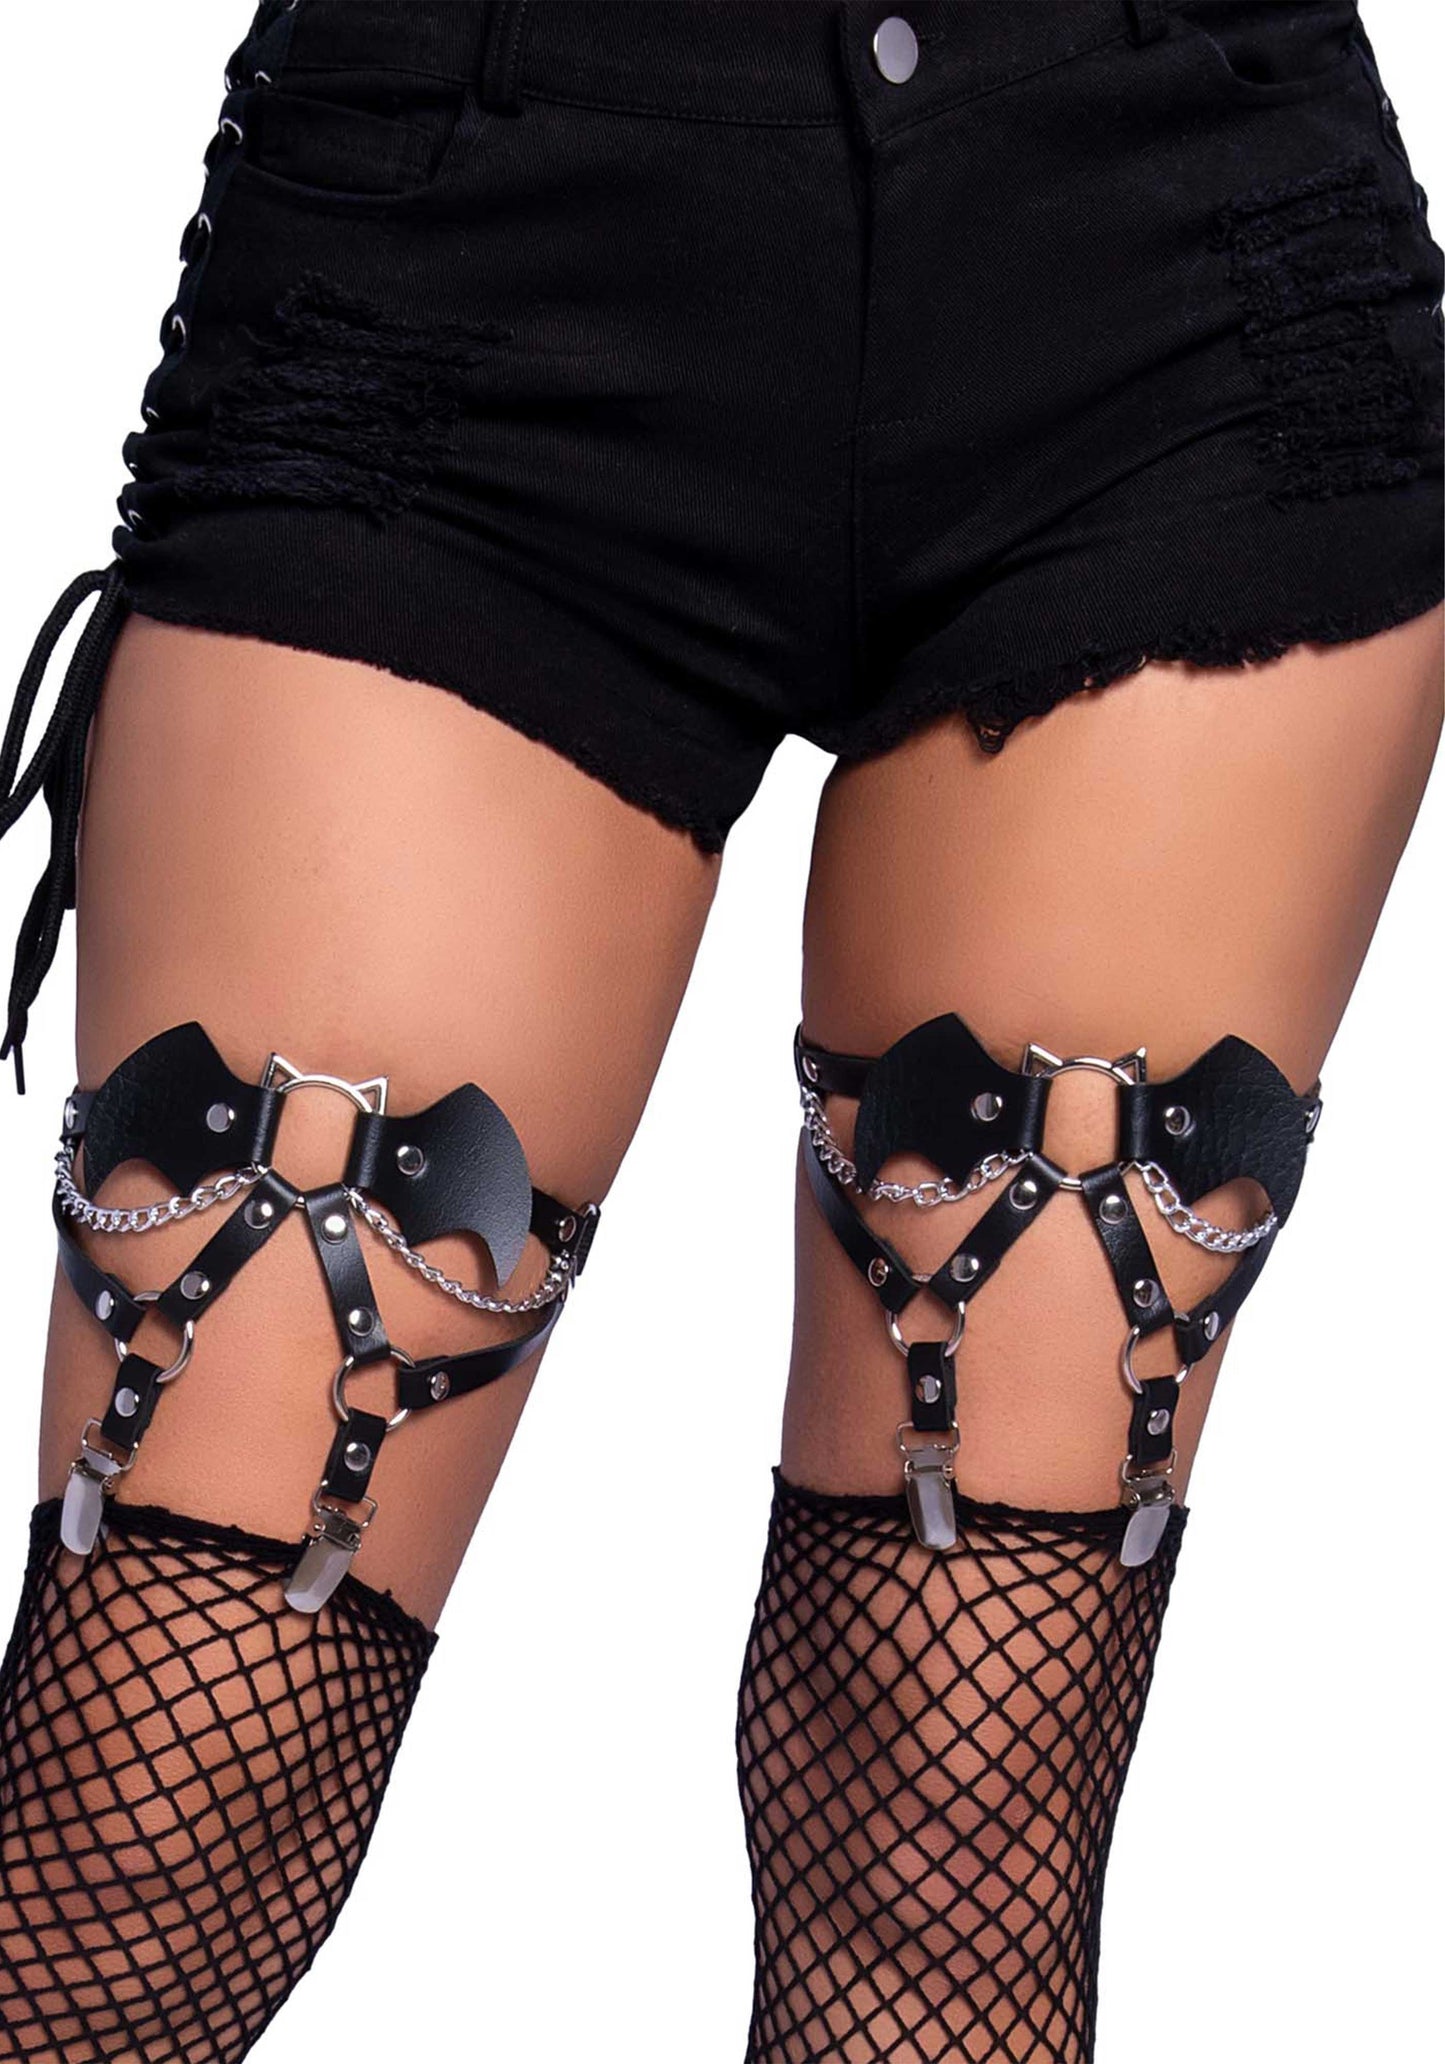 Leg Avenue 2783 Bat O-Ring Garter - Black faux leather bat style studded adjustable thigh high garter suspenders with chain detail, ideal for wearing with stockings and thigh-high socks.